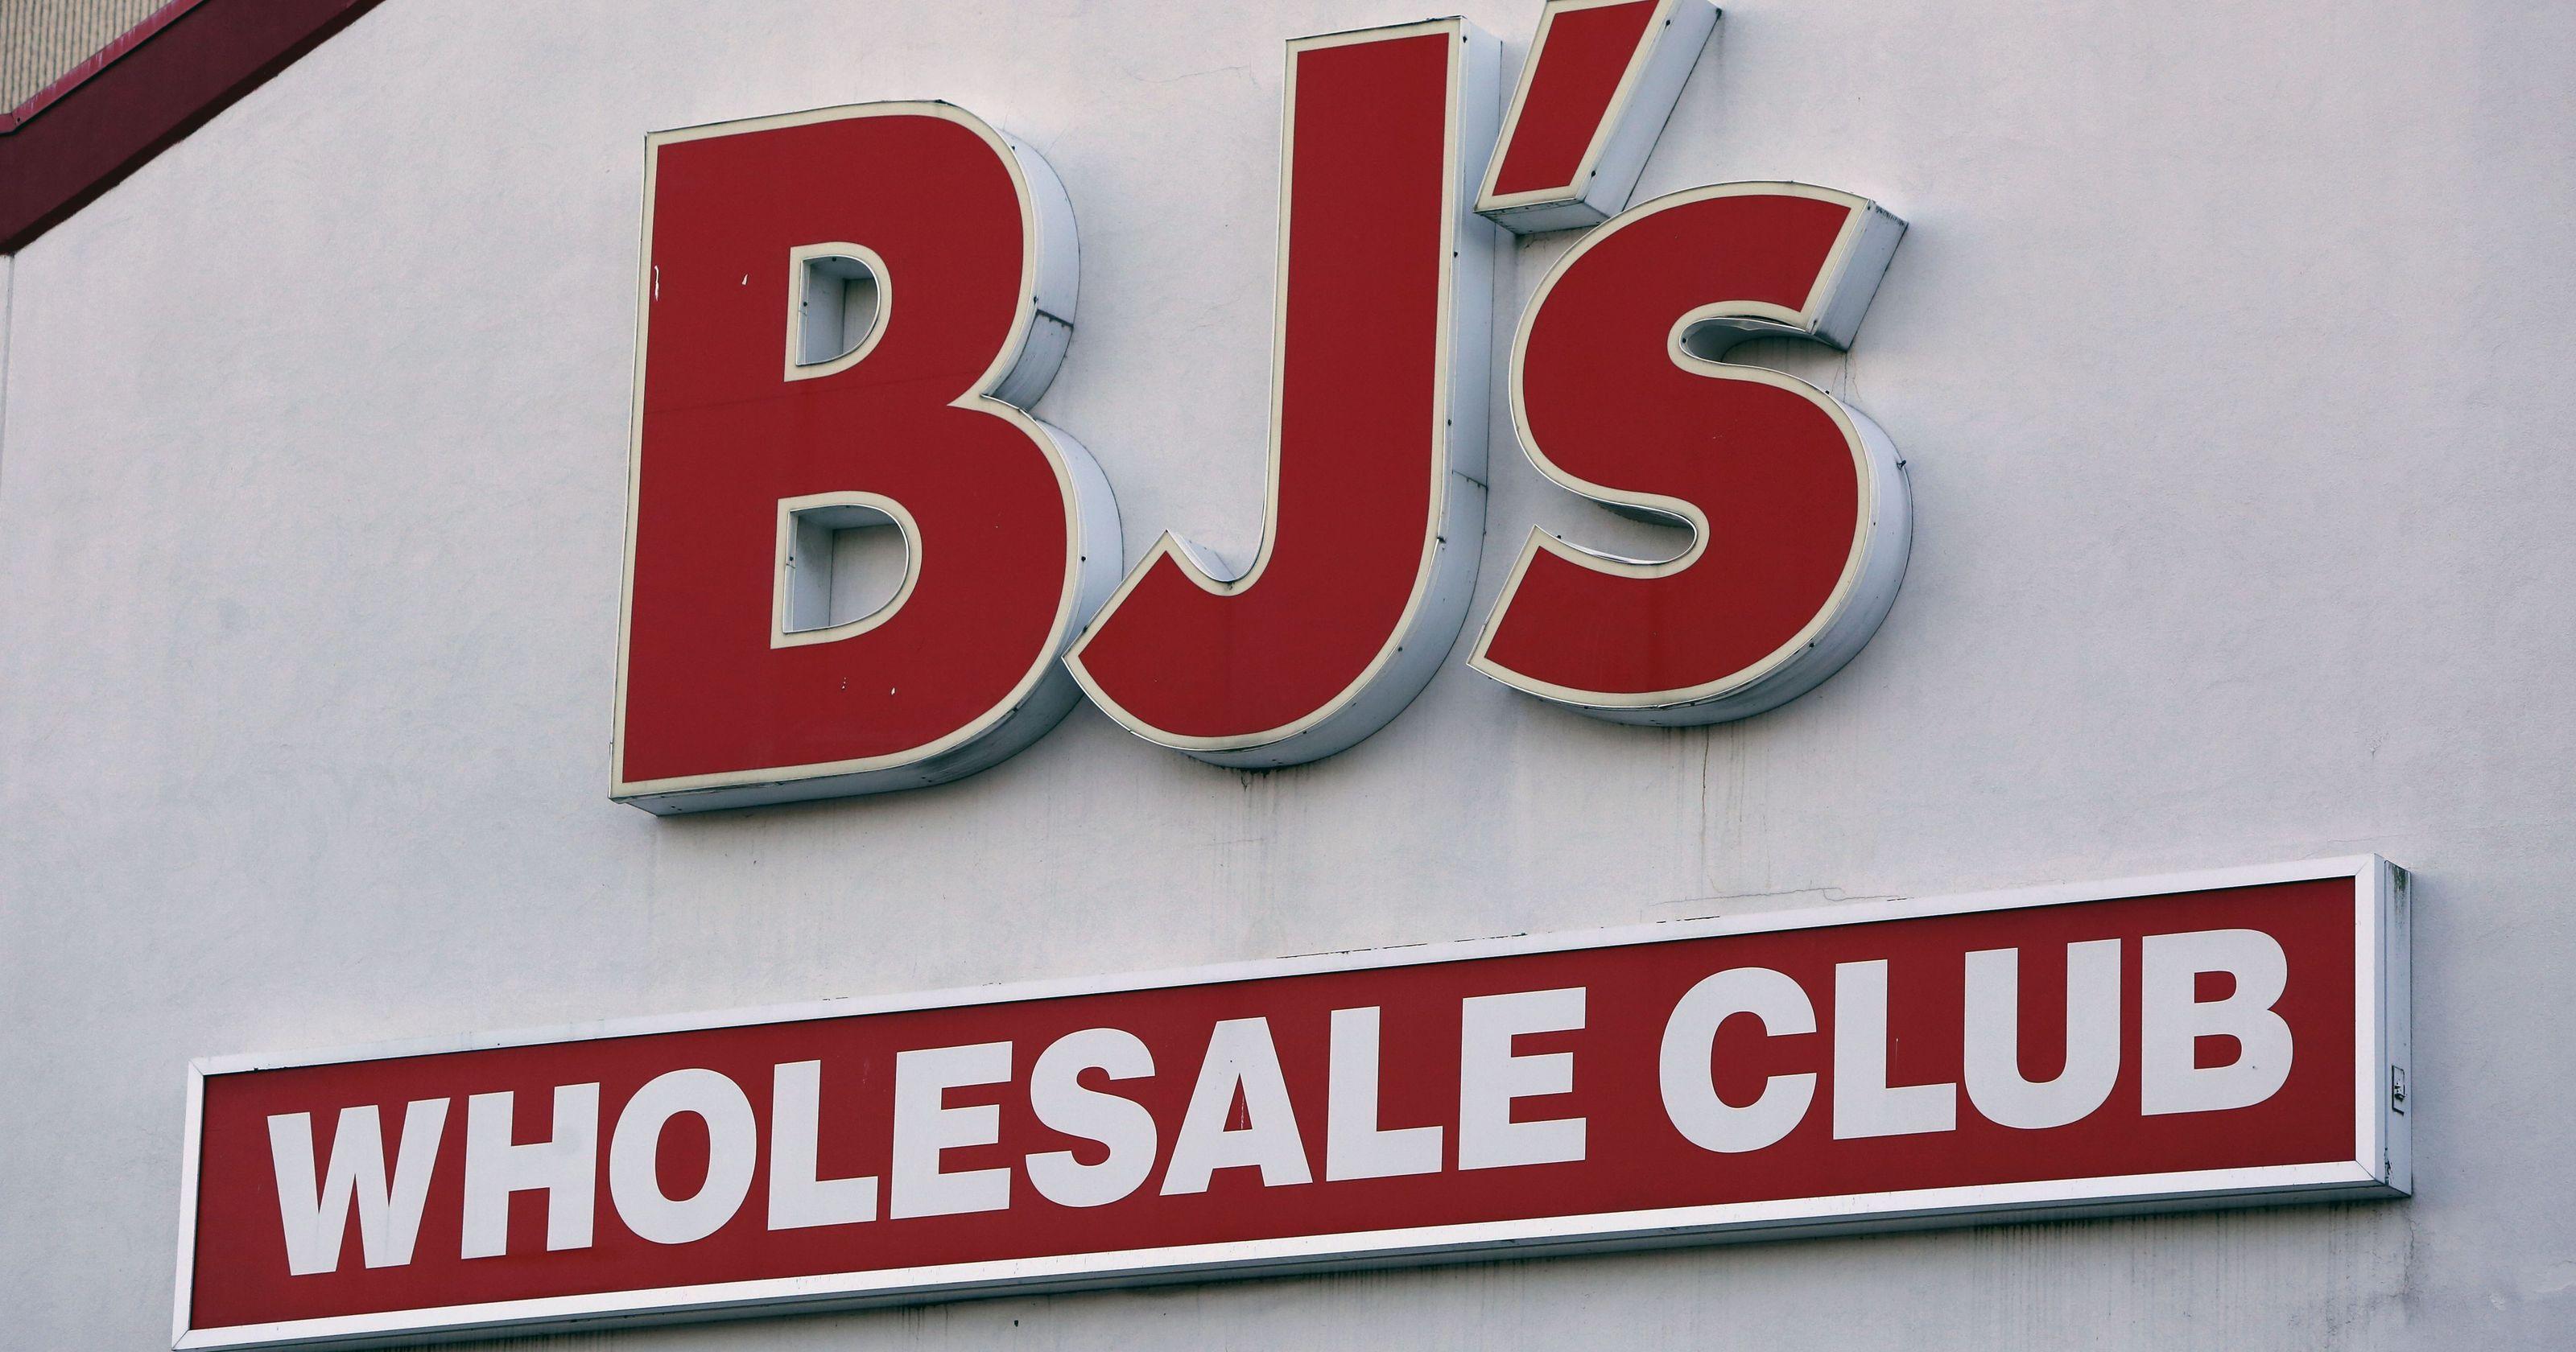 BJ's Club Logo - BJ's Wholesale Club announces holiday hours, first Black Friday ad out